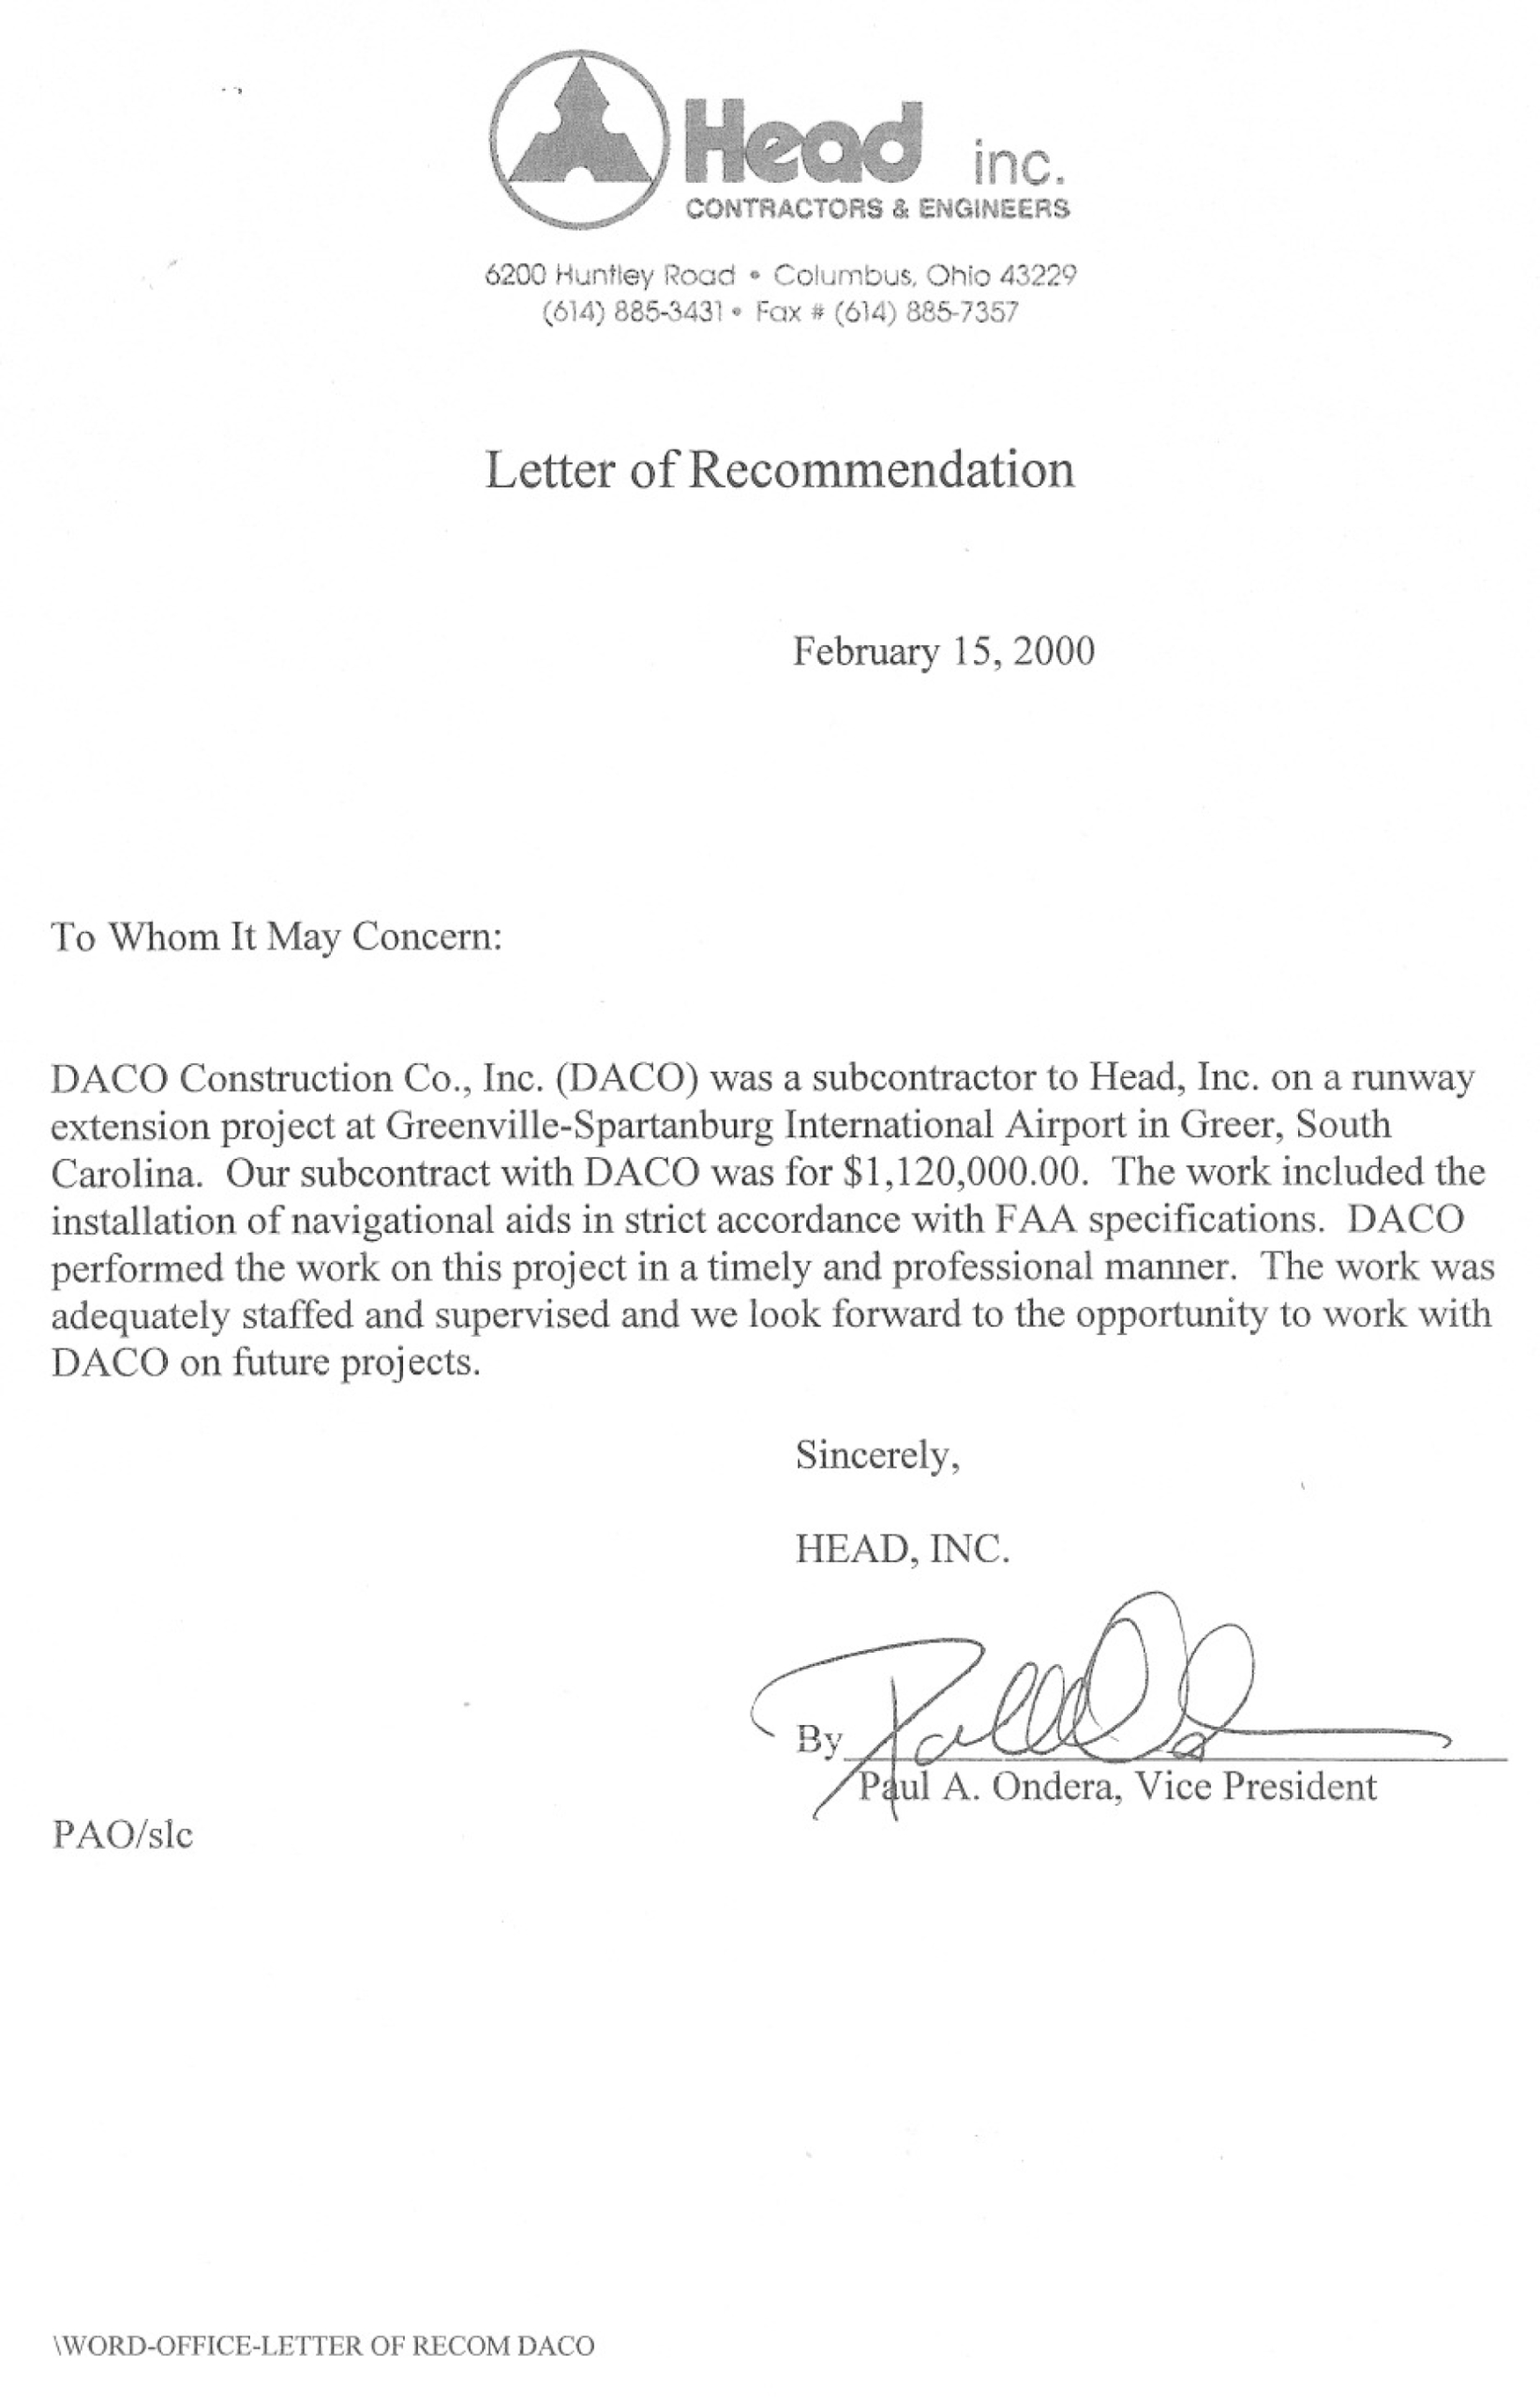 Construction Work Recommendation Letter | Templates At throughout Letter Of Reccomendation Template